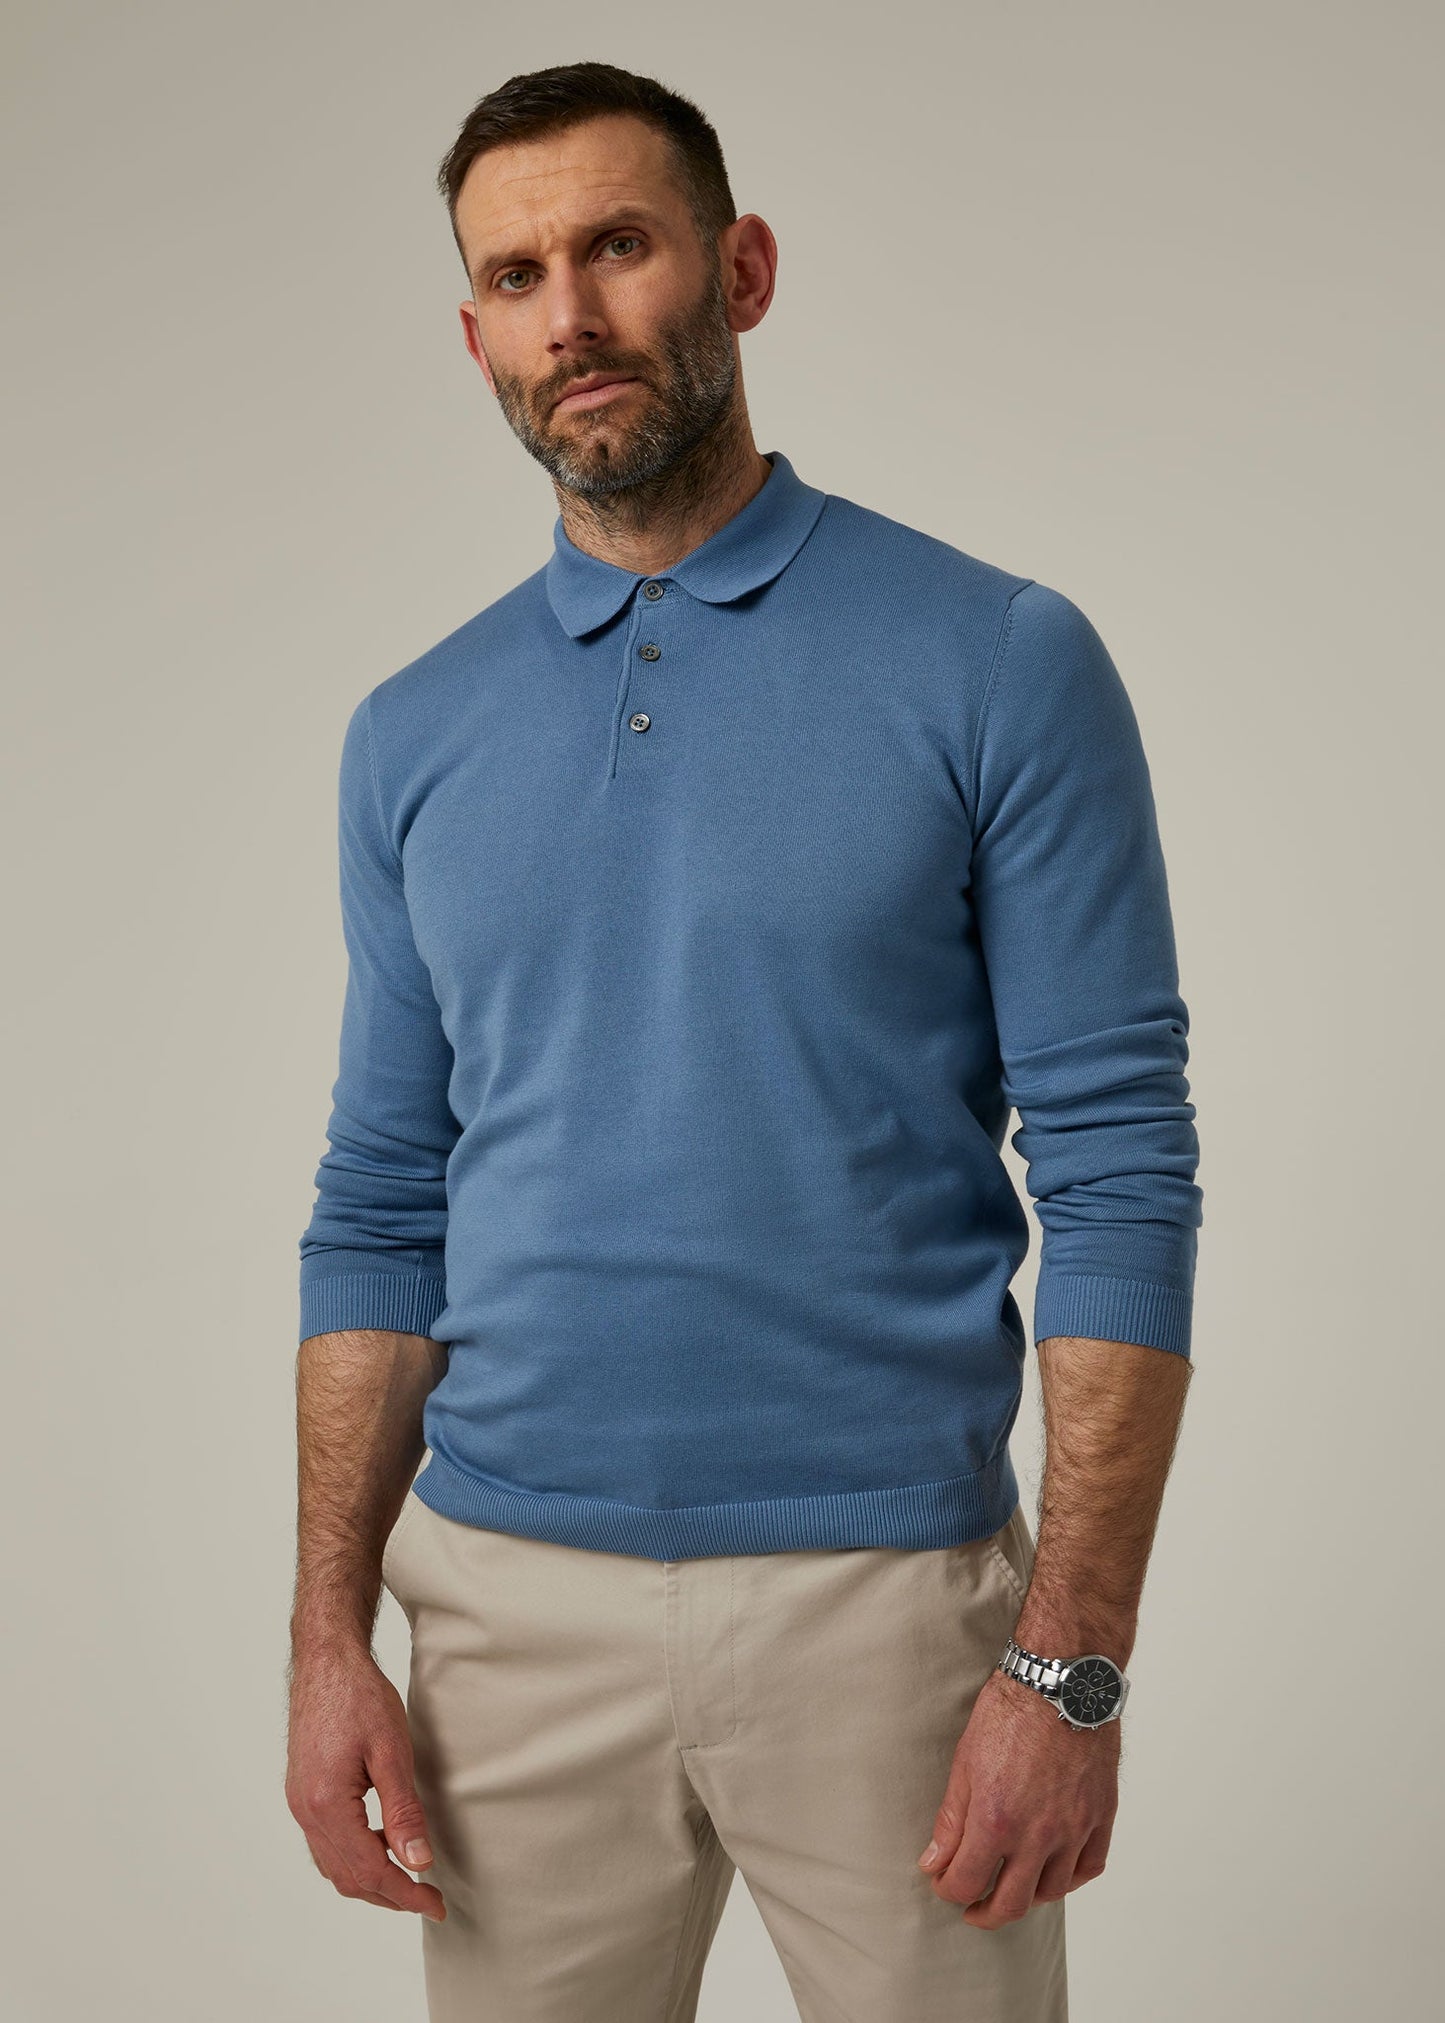 Emsworth Cotton Long Sleeve Polo Shirt in Airforce